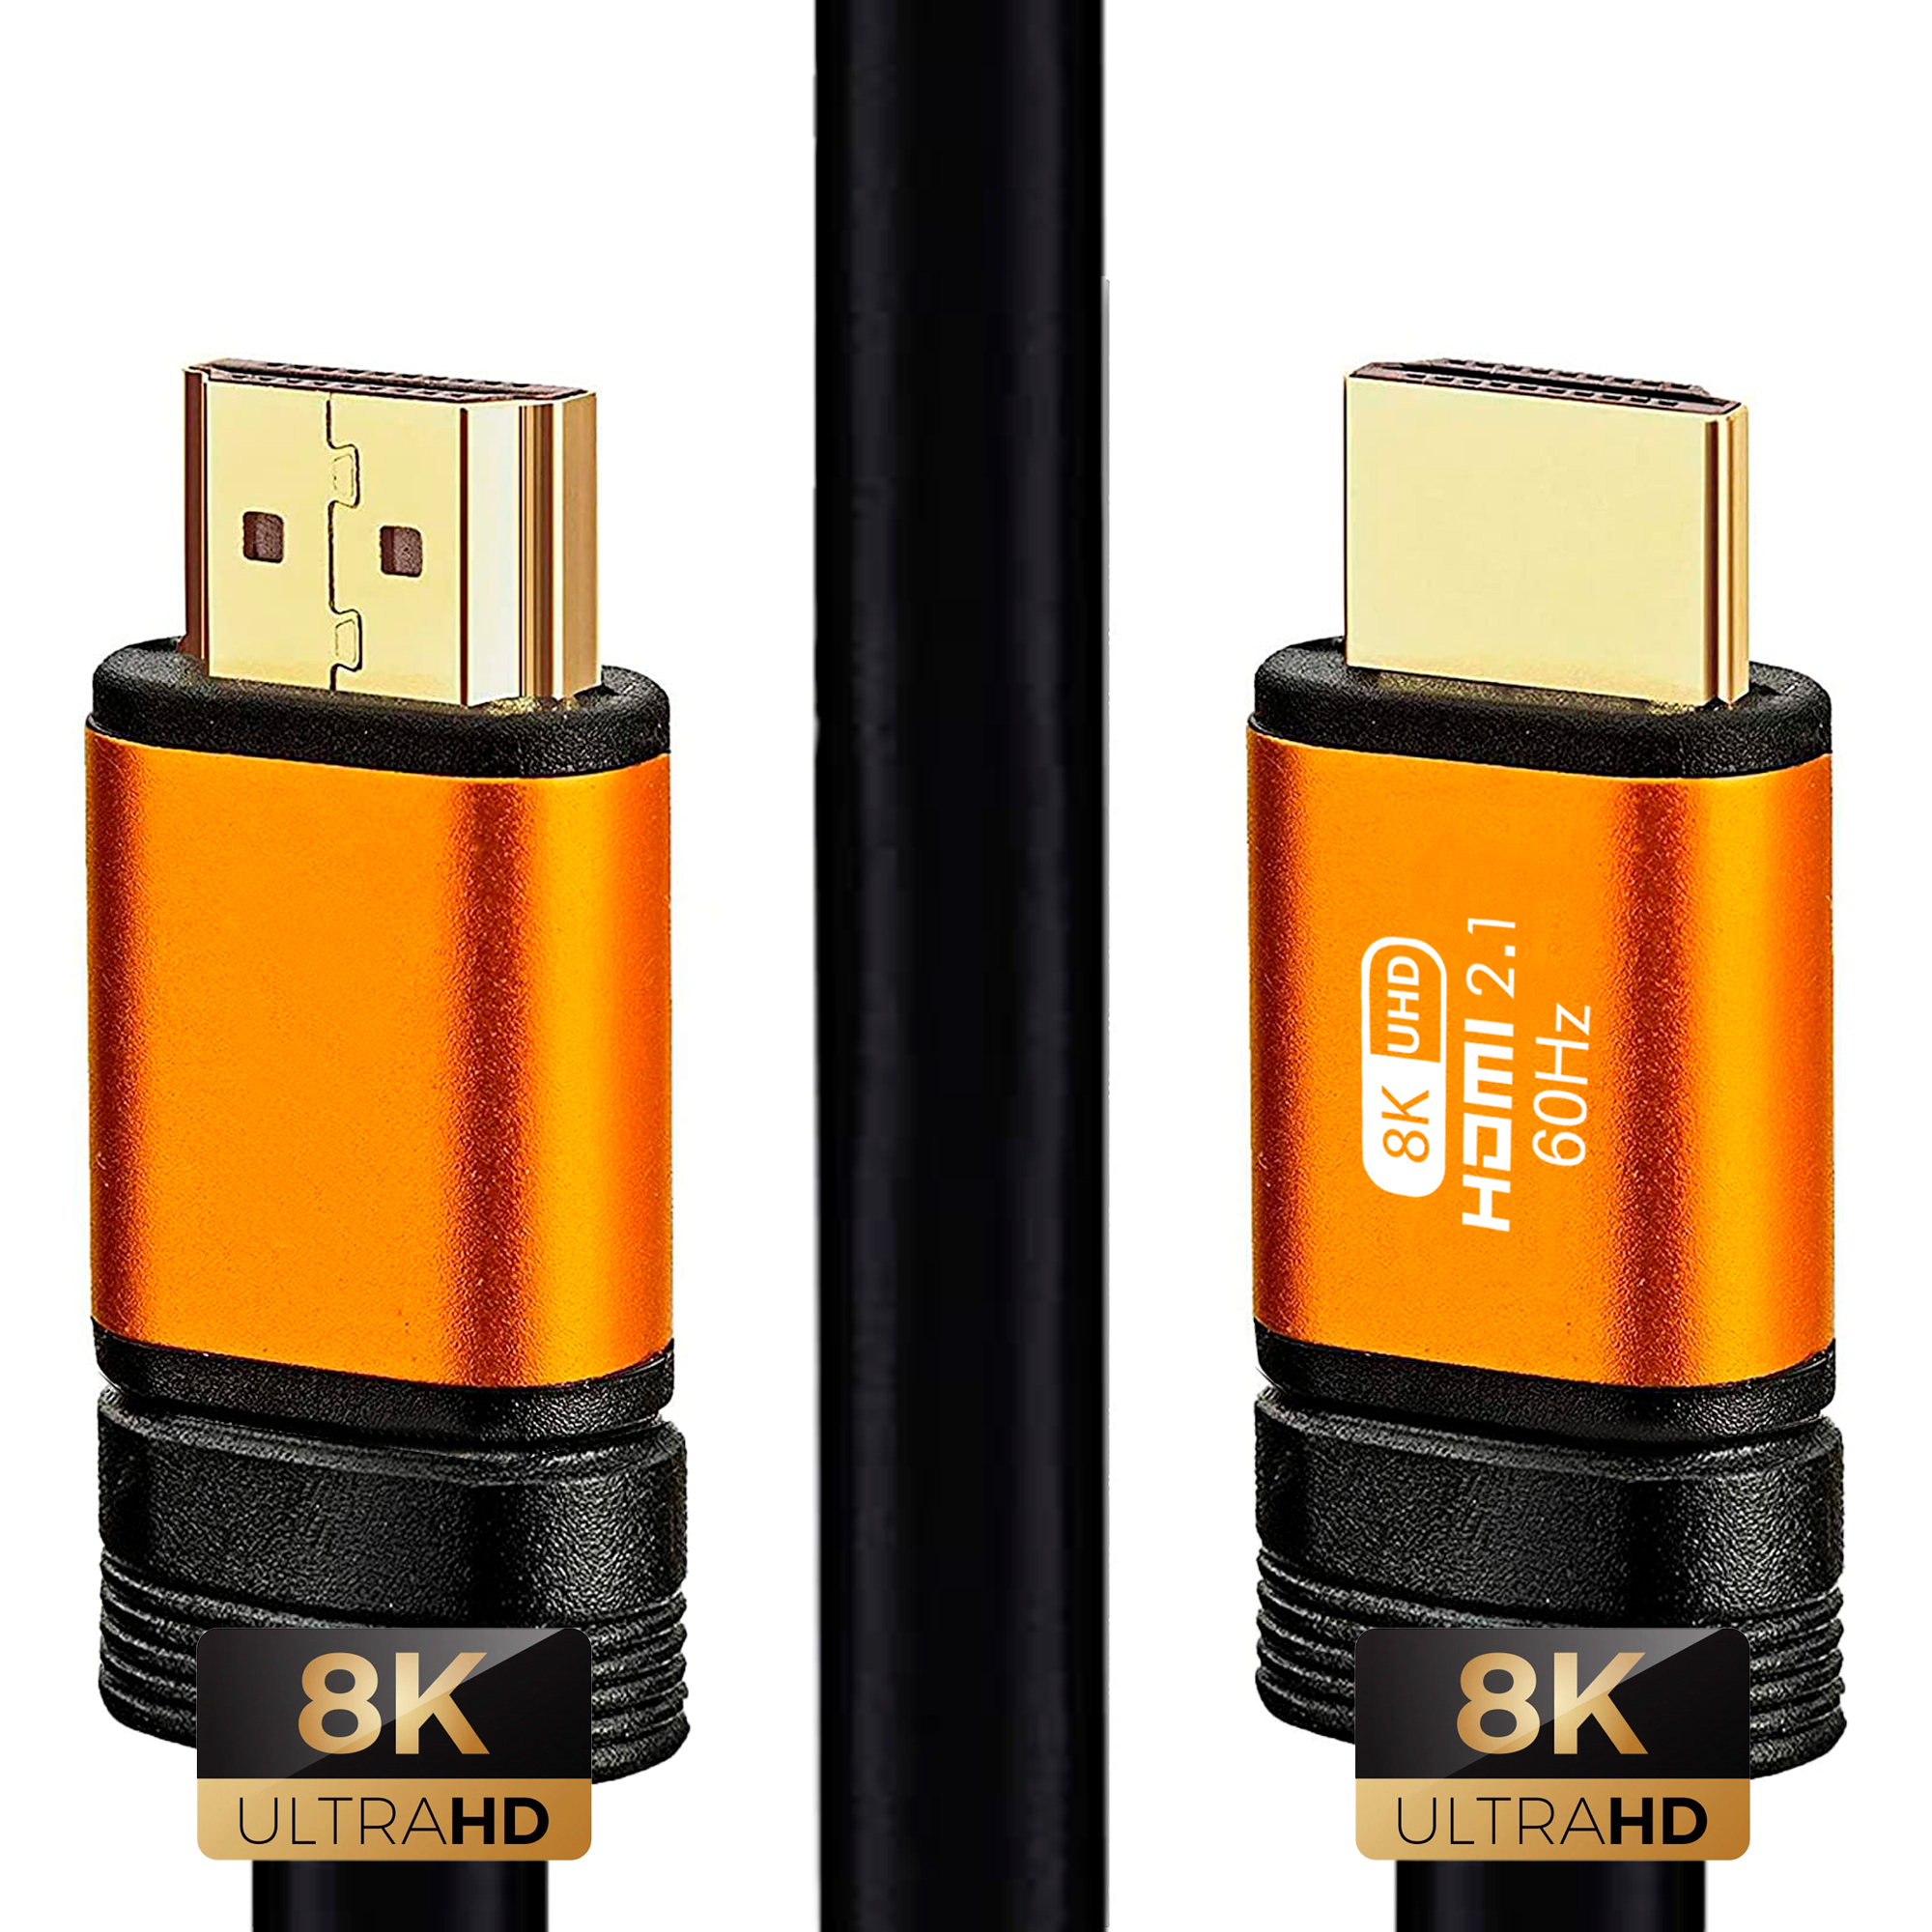 https://www.proyectorbarato.com/images/productos/cable-hdmi-2-1-de-4-metros-8k-48gbps-1-77349.jpeg